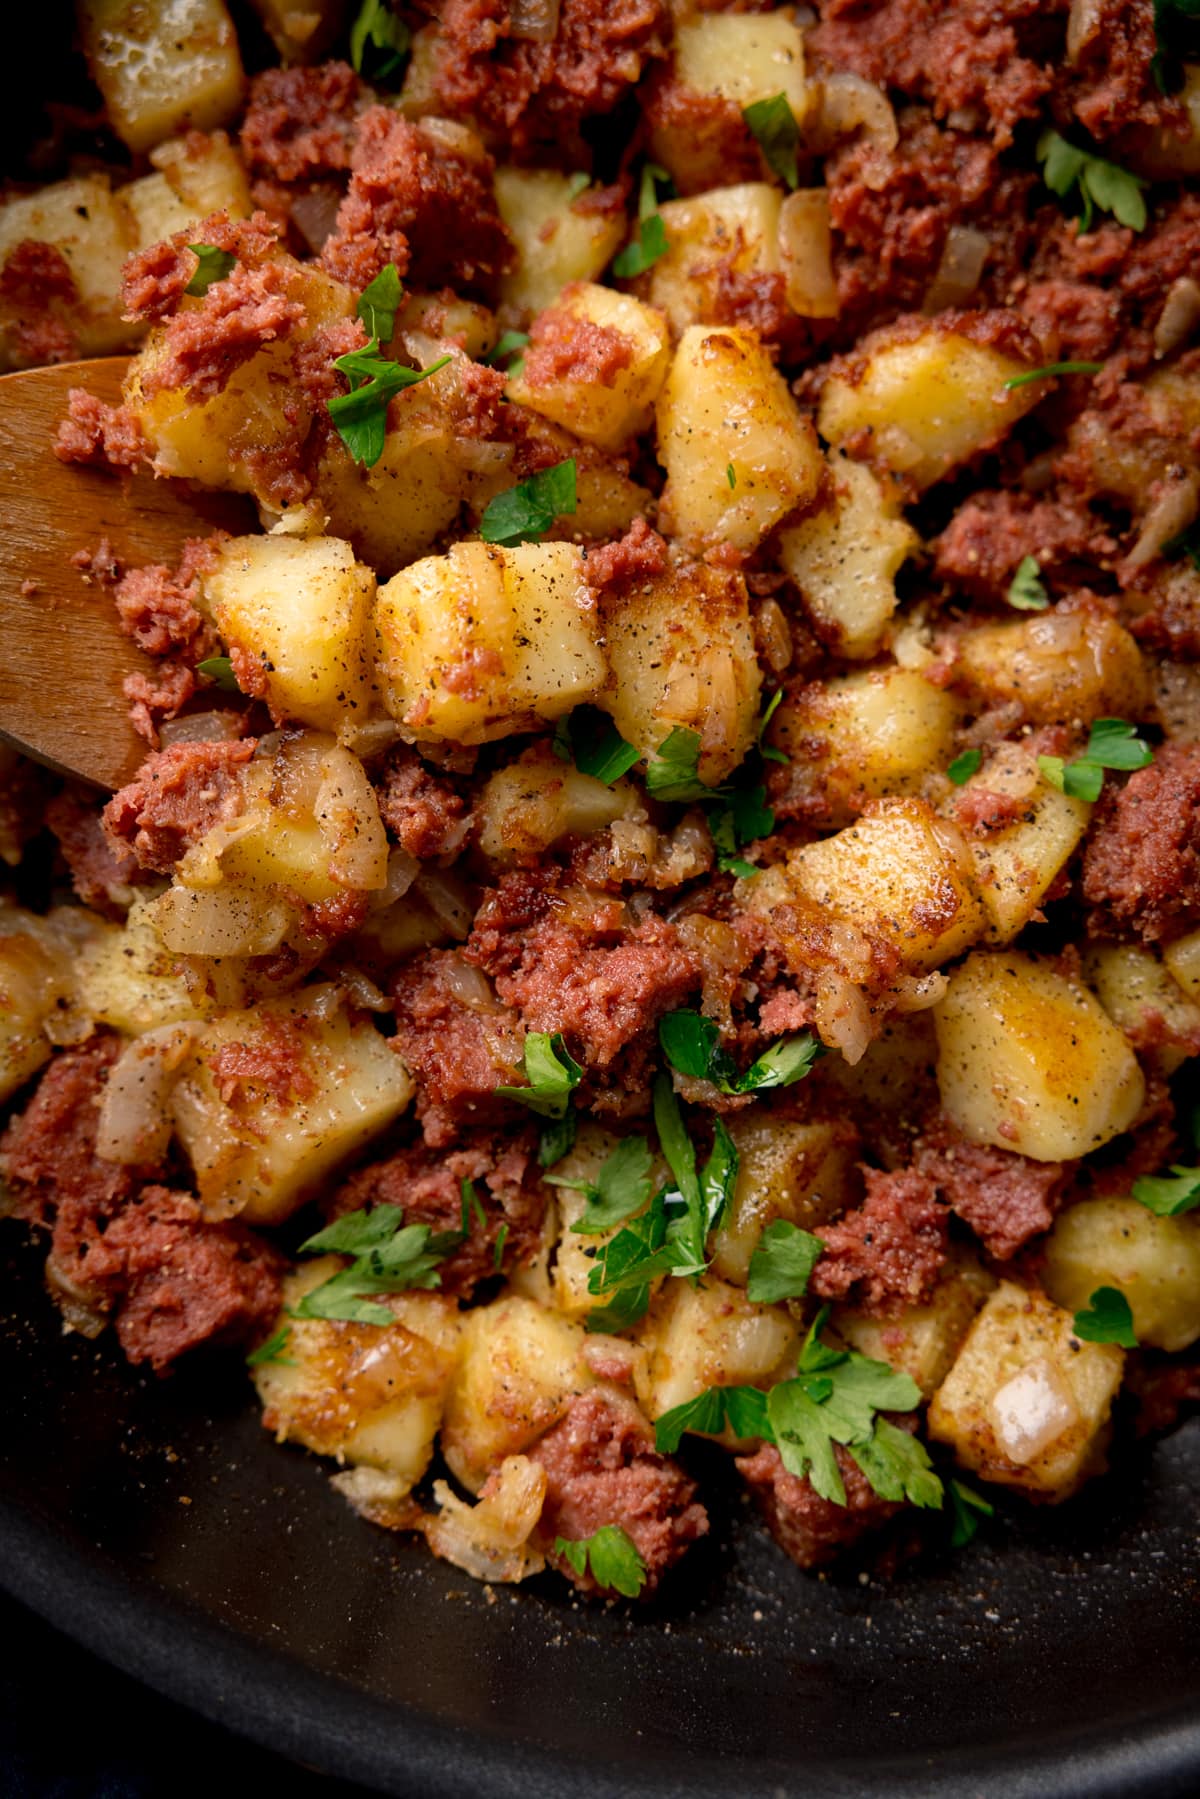 Tall, closeup, overhead image of corned beef hash in a frying pan with a wooden spoon sticking out. There is parsley sprinkled on top.